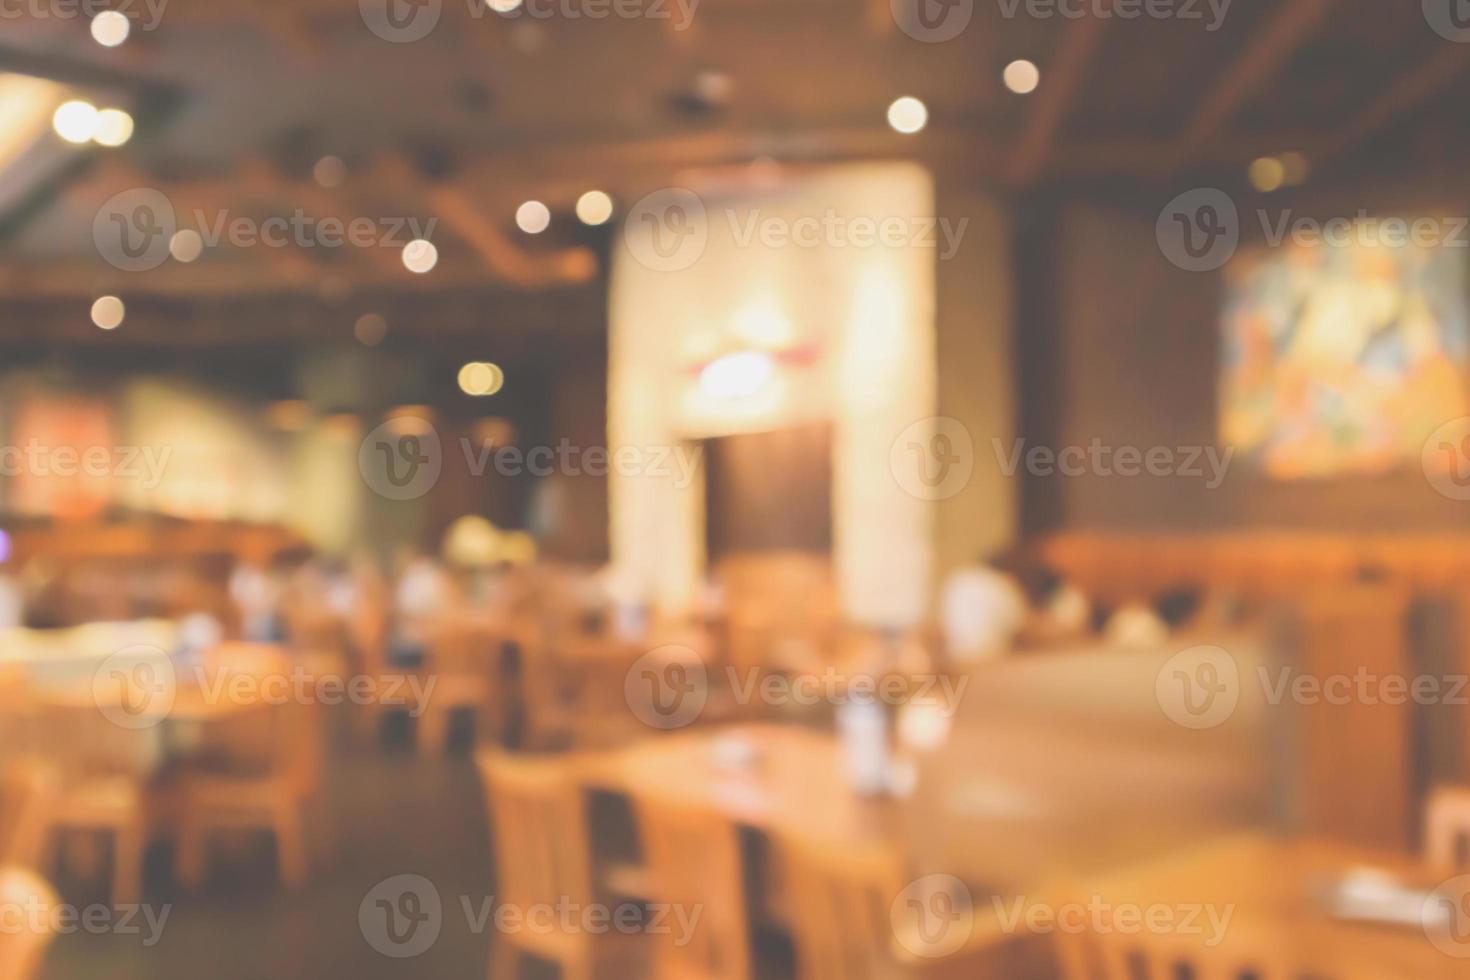 Restaurant interior with customer and wood table blur abstract background with bokeh light photo